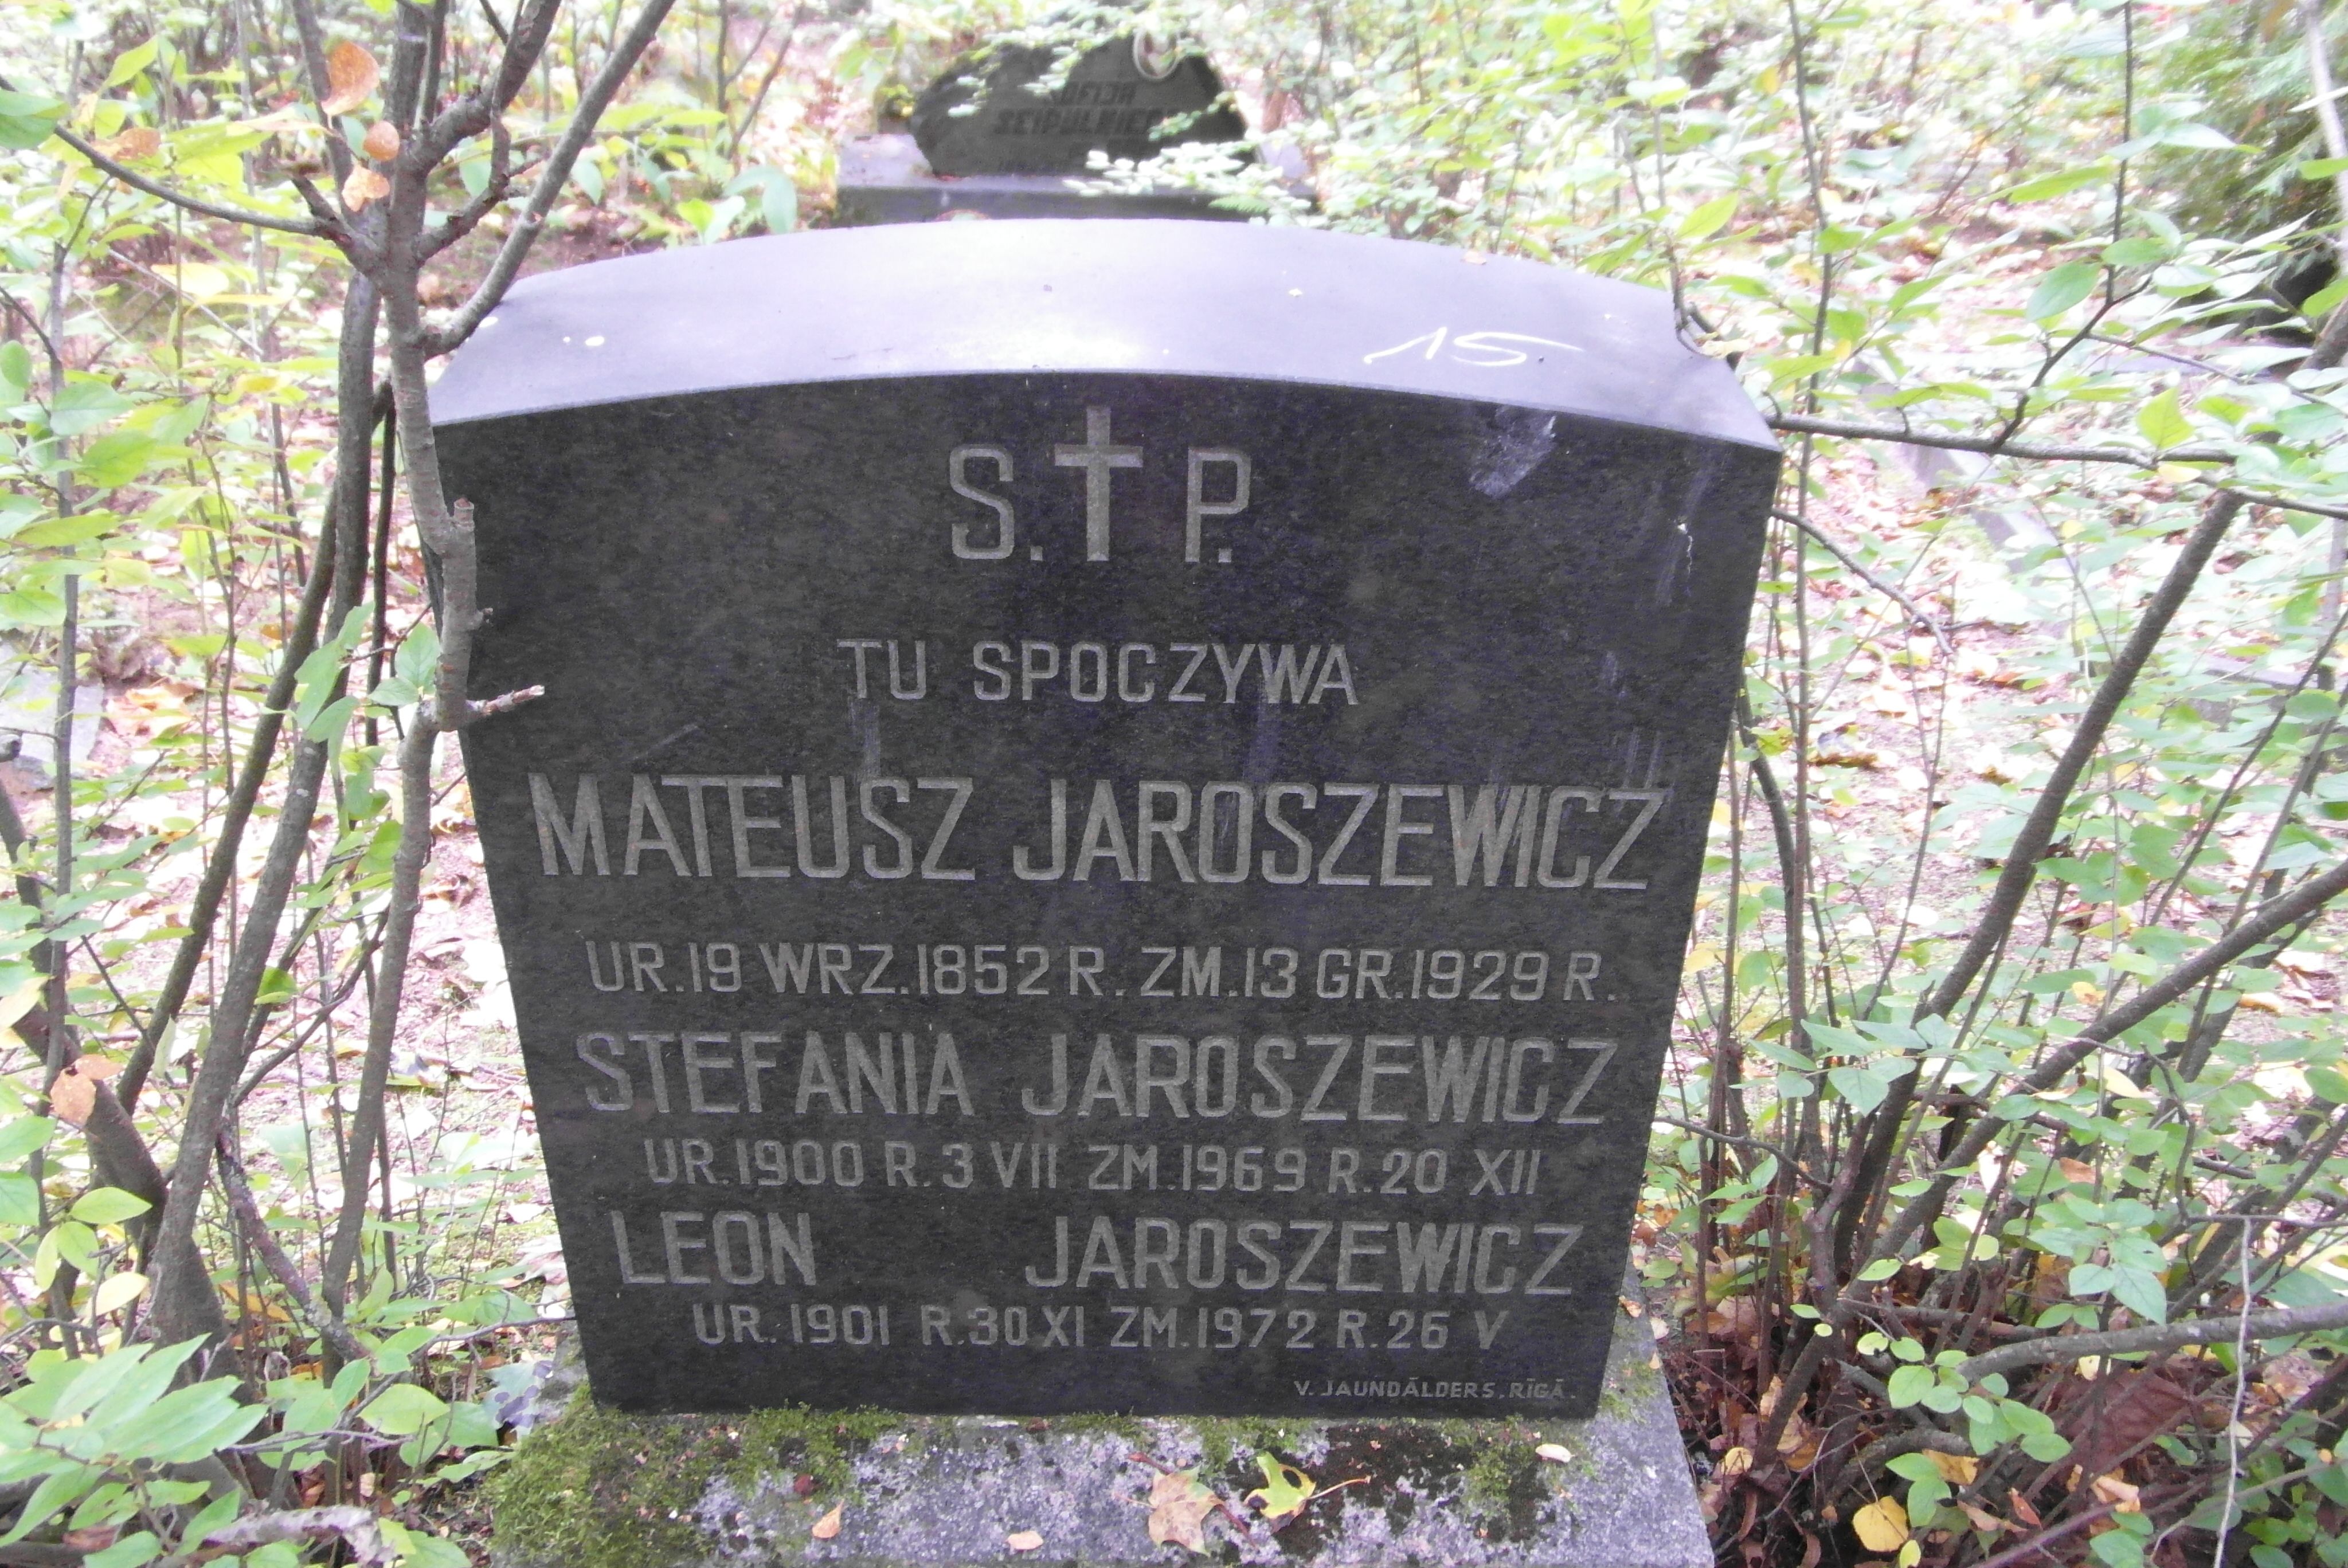 Tombstone of Leon, Matthew and Stefania Yaroshevich, St Michael's cemetery in Riga, as of 2021.